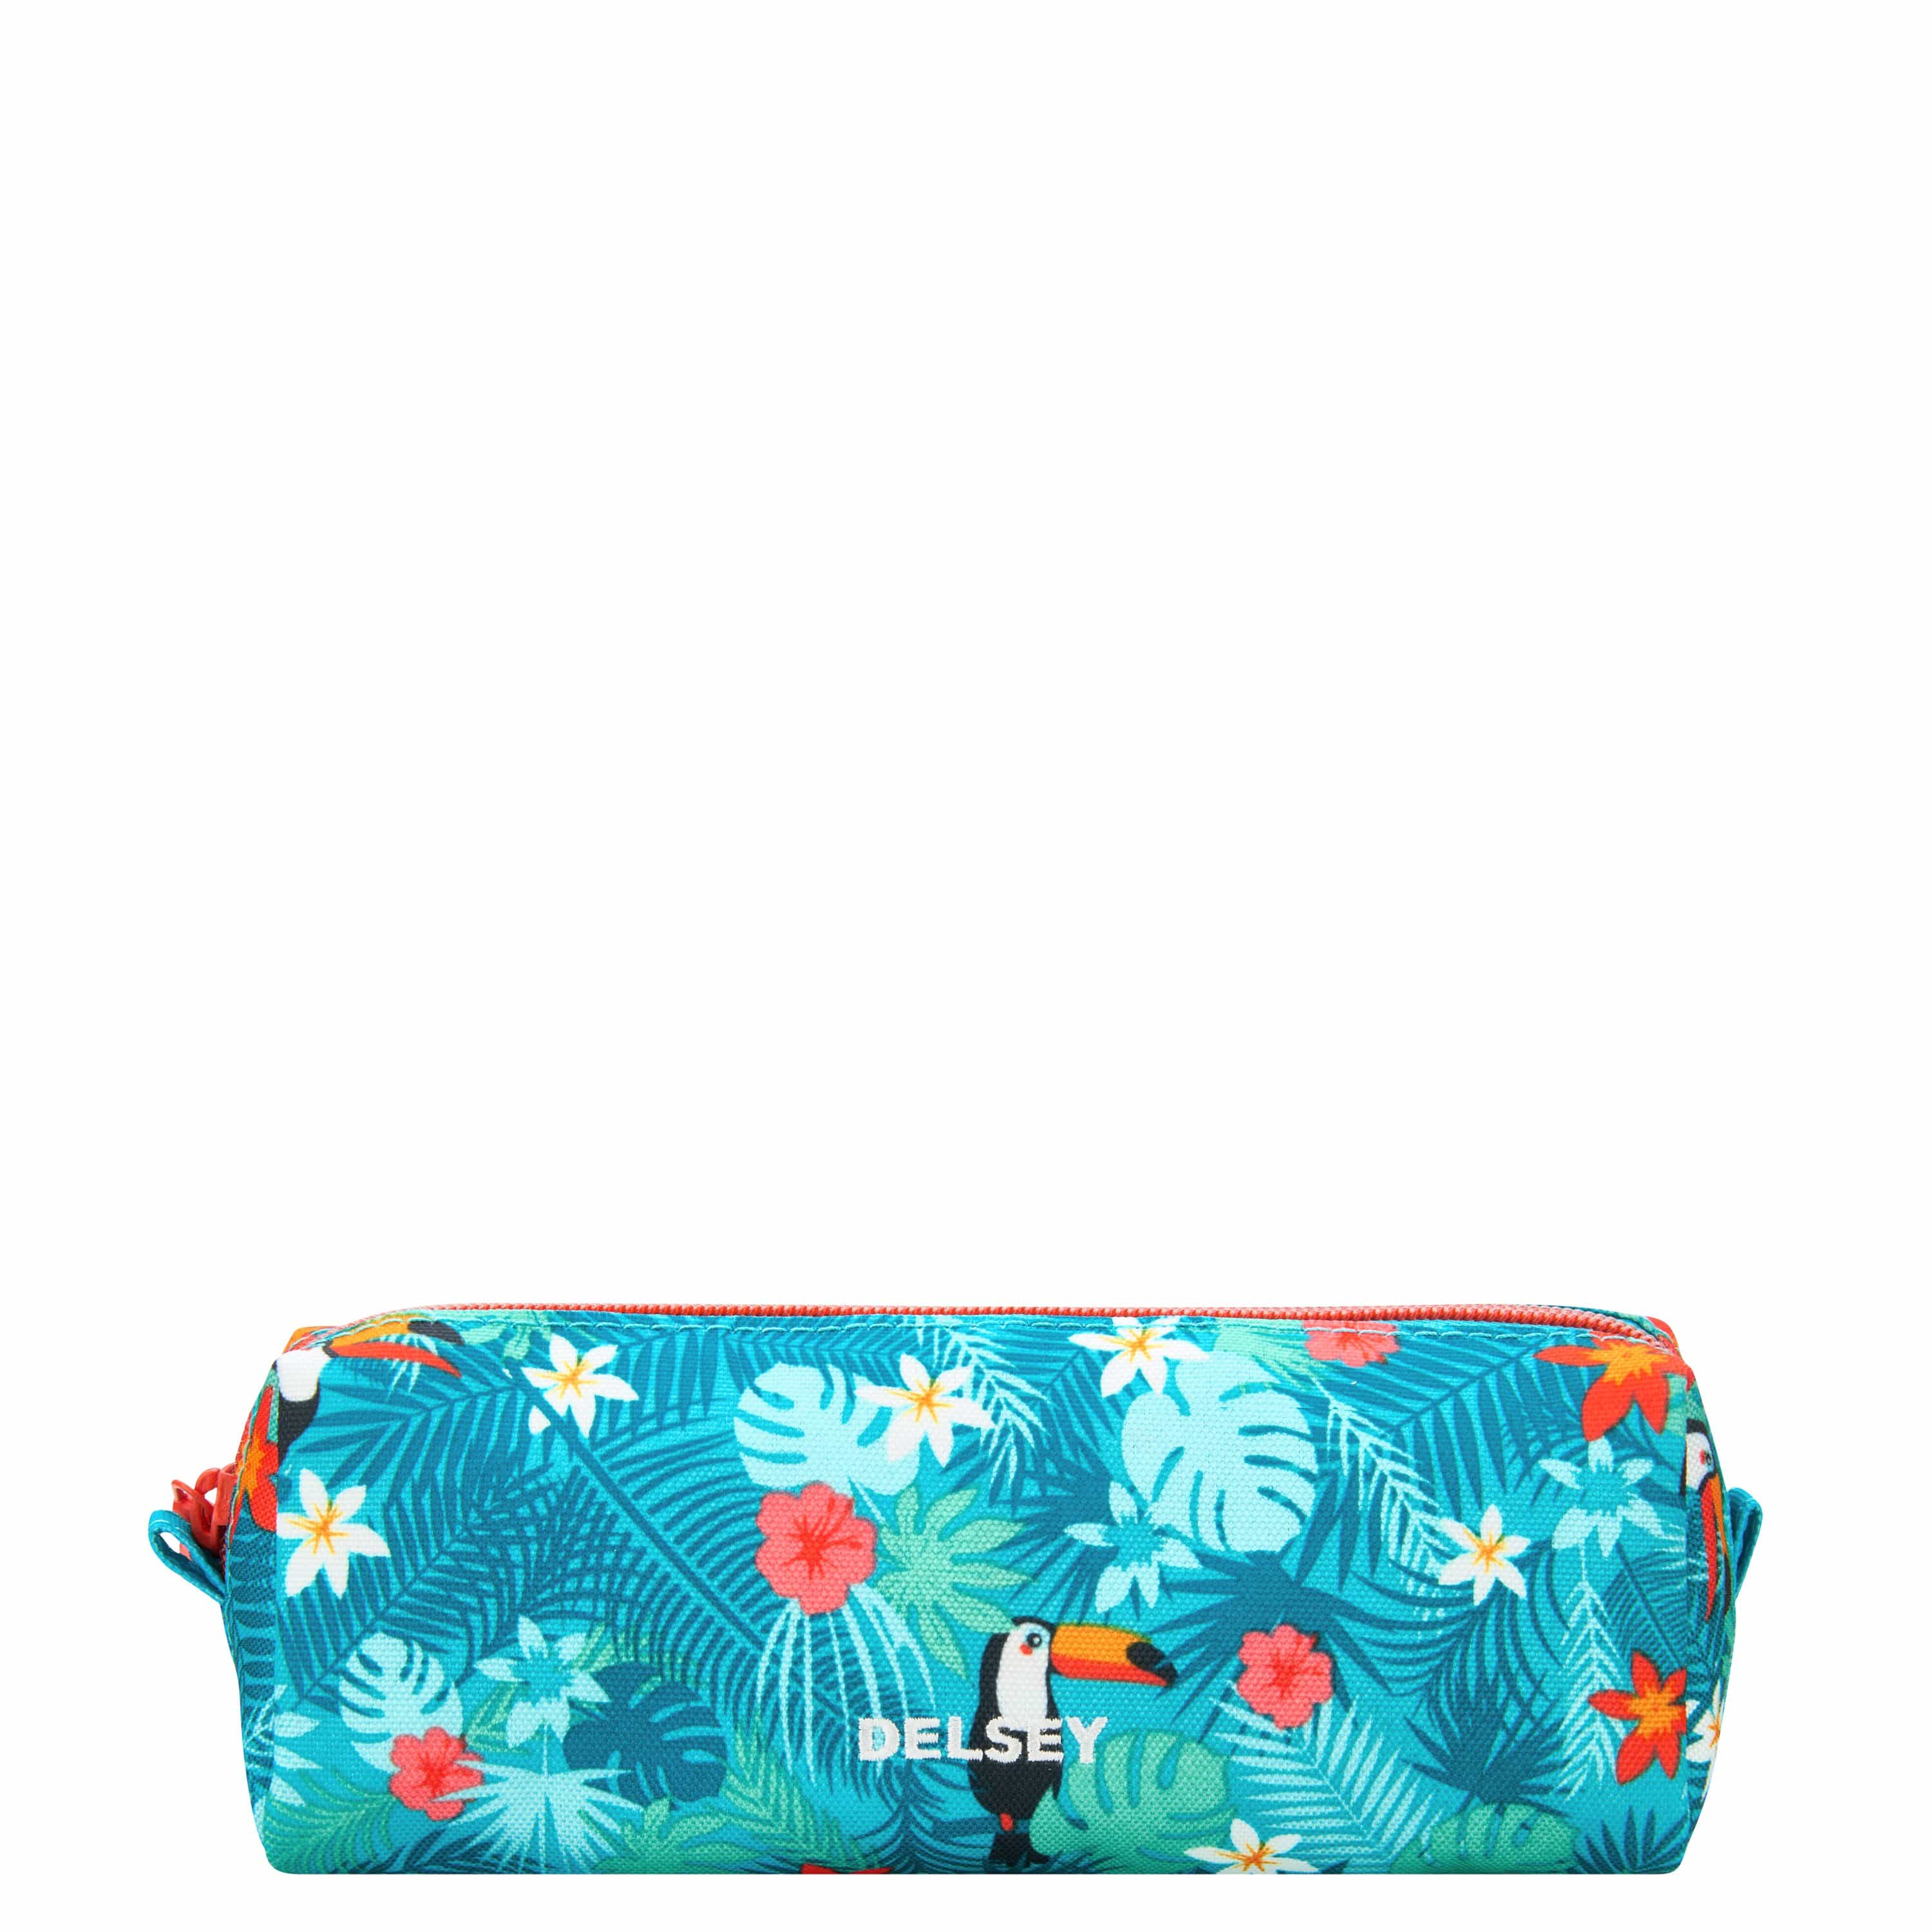 DELSEY SCHOOL 2018 PENCIL CASE TURQUOISE 00339317112 TURQUOISE